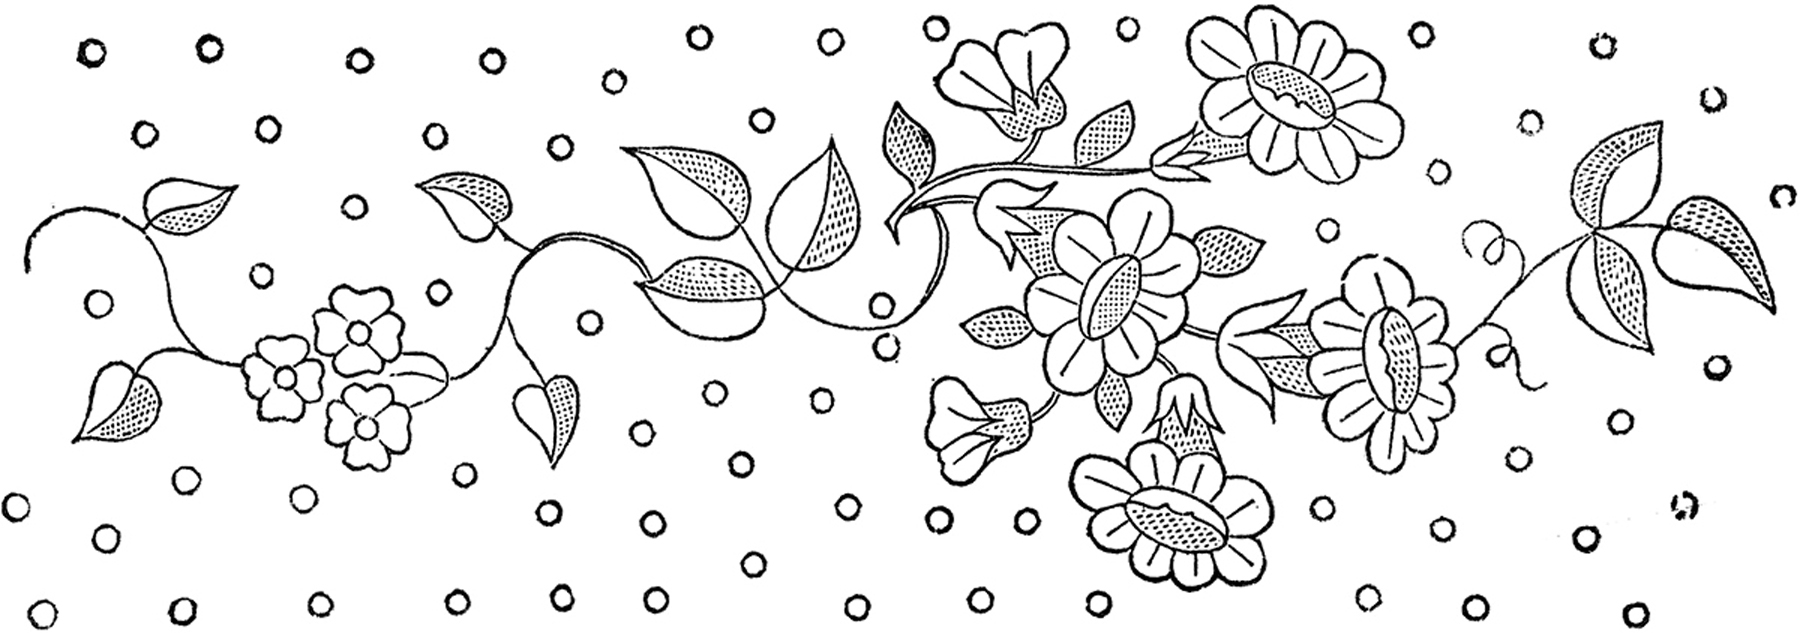 Embroidery Transfer Patterns Floral Embroidery Patterns Pretty The Graphics Fairy